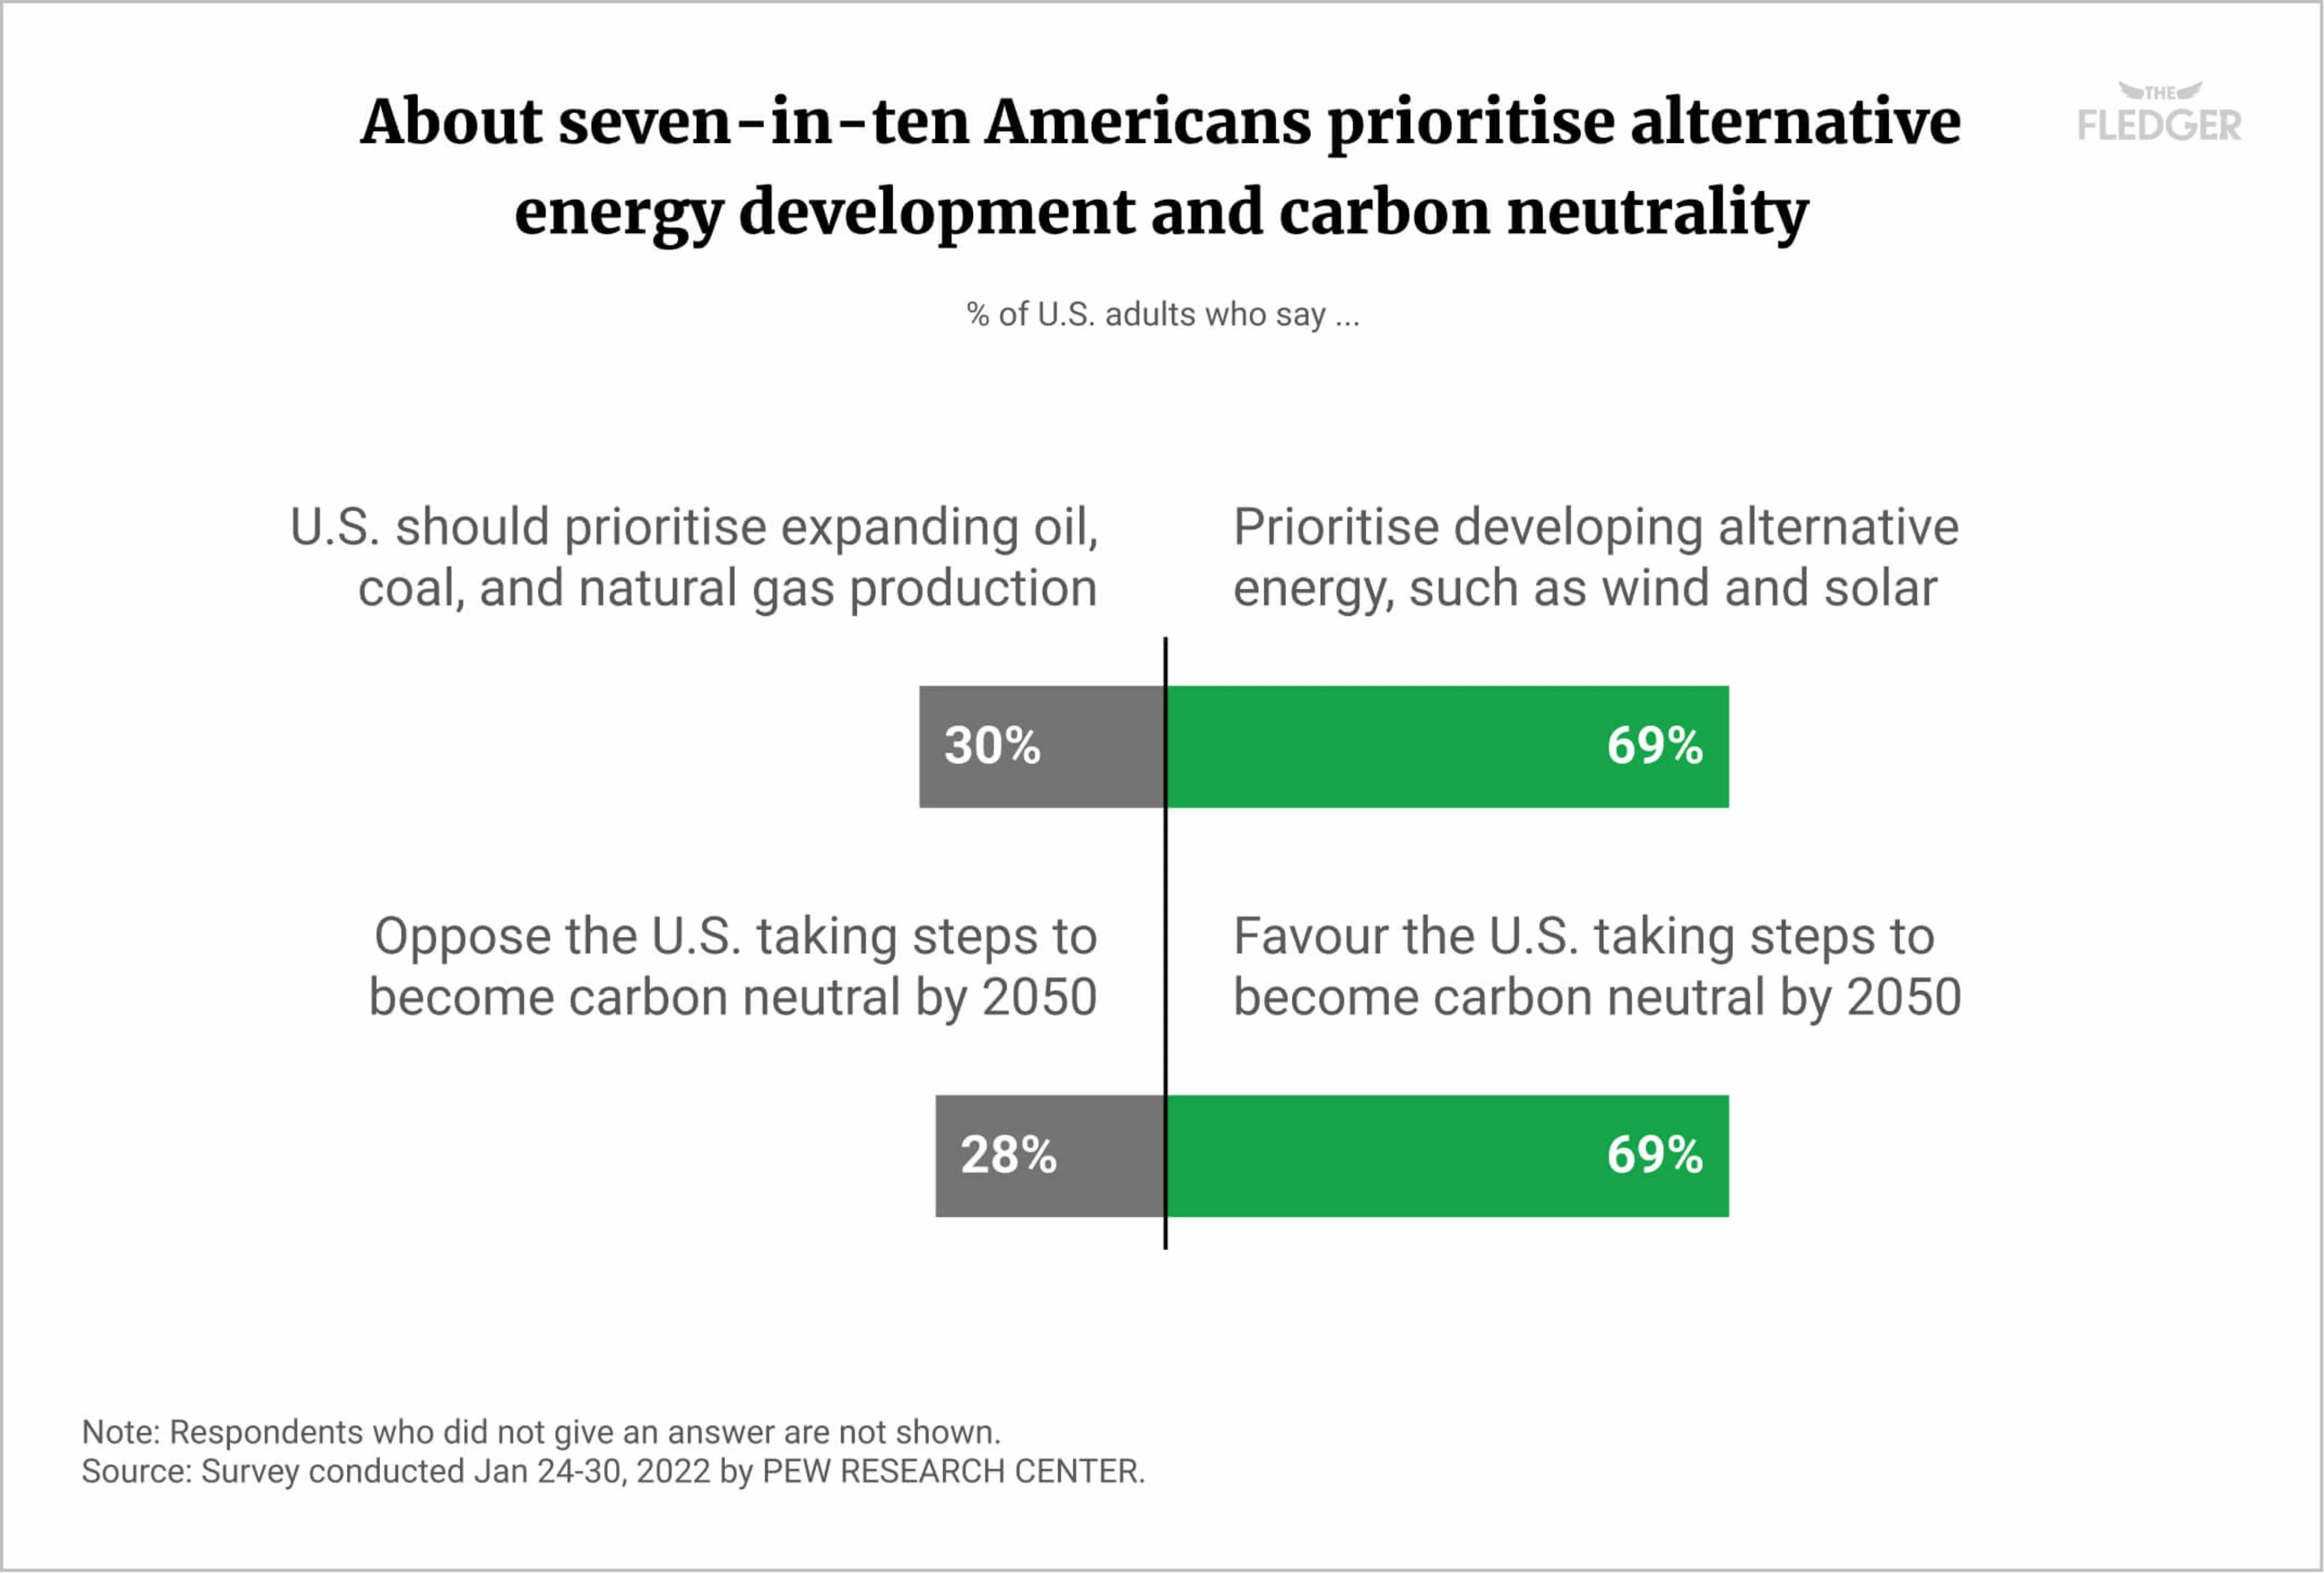 Seven-in-ten Americans prioritise alternative energy development and carbon neutrality